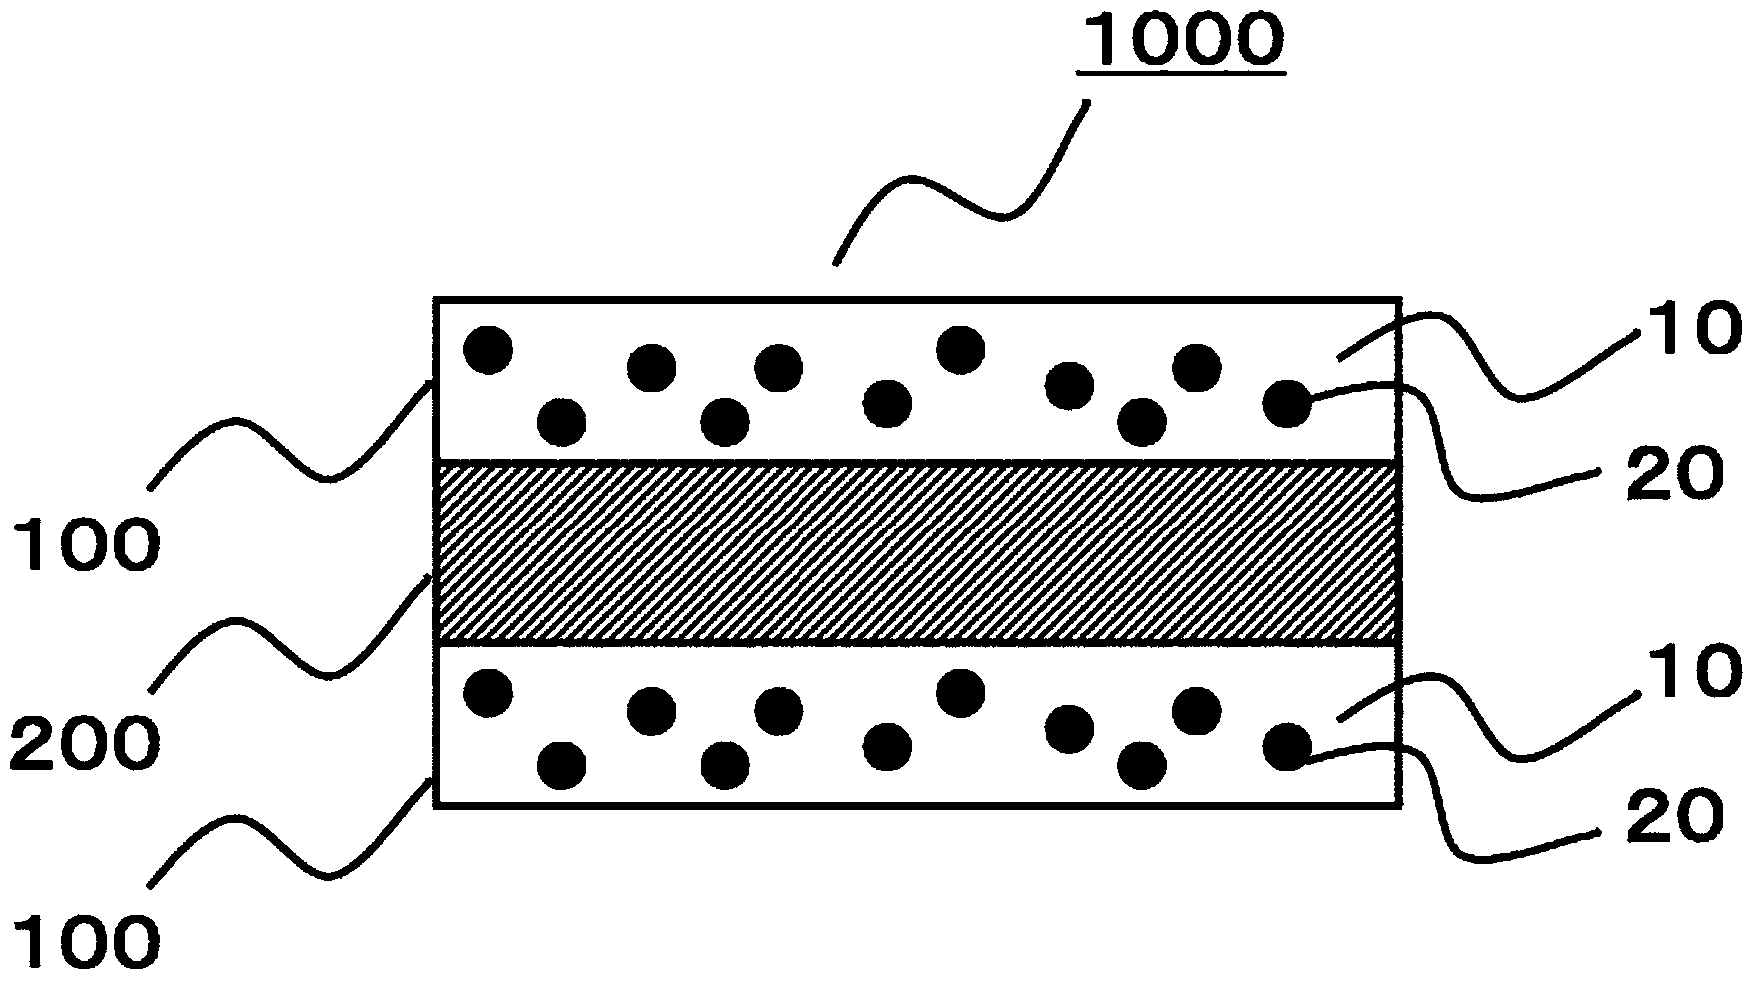 Shatterproofing member with hardenable pressure-sensitive adhesive layer